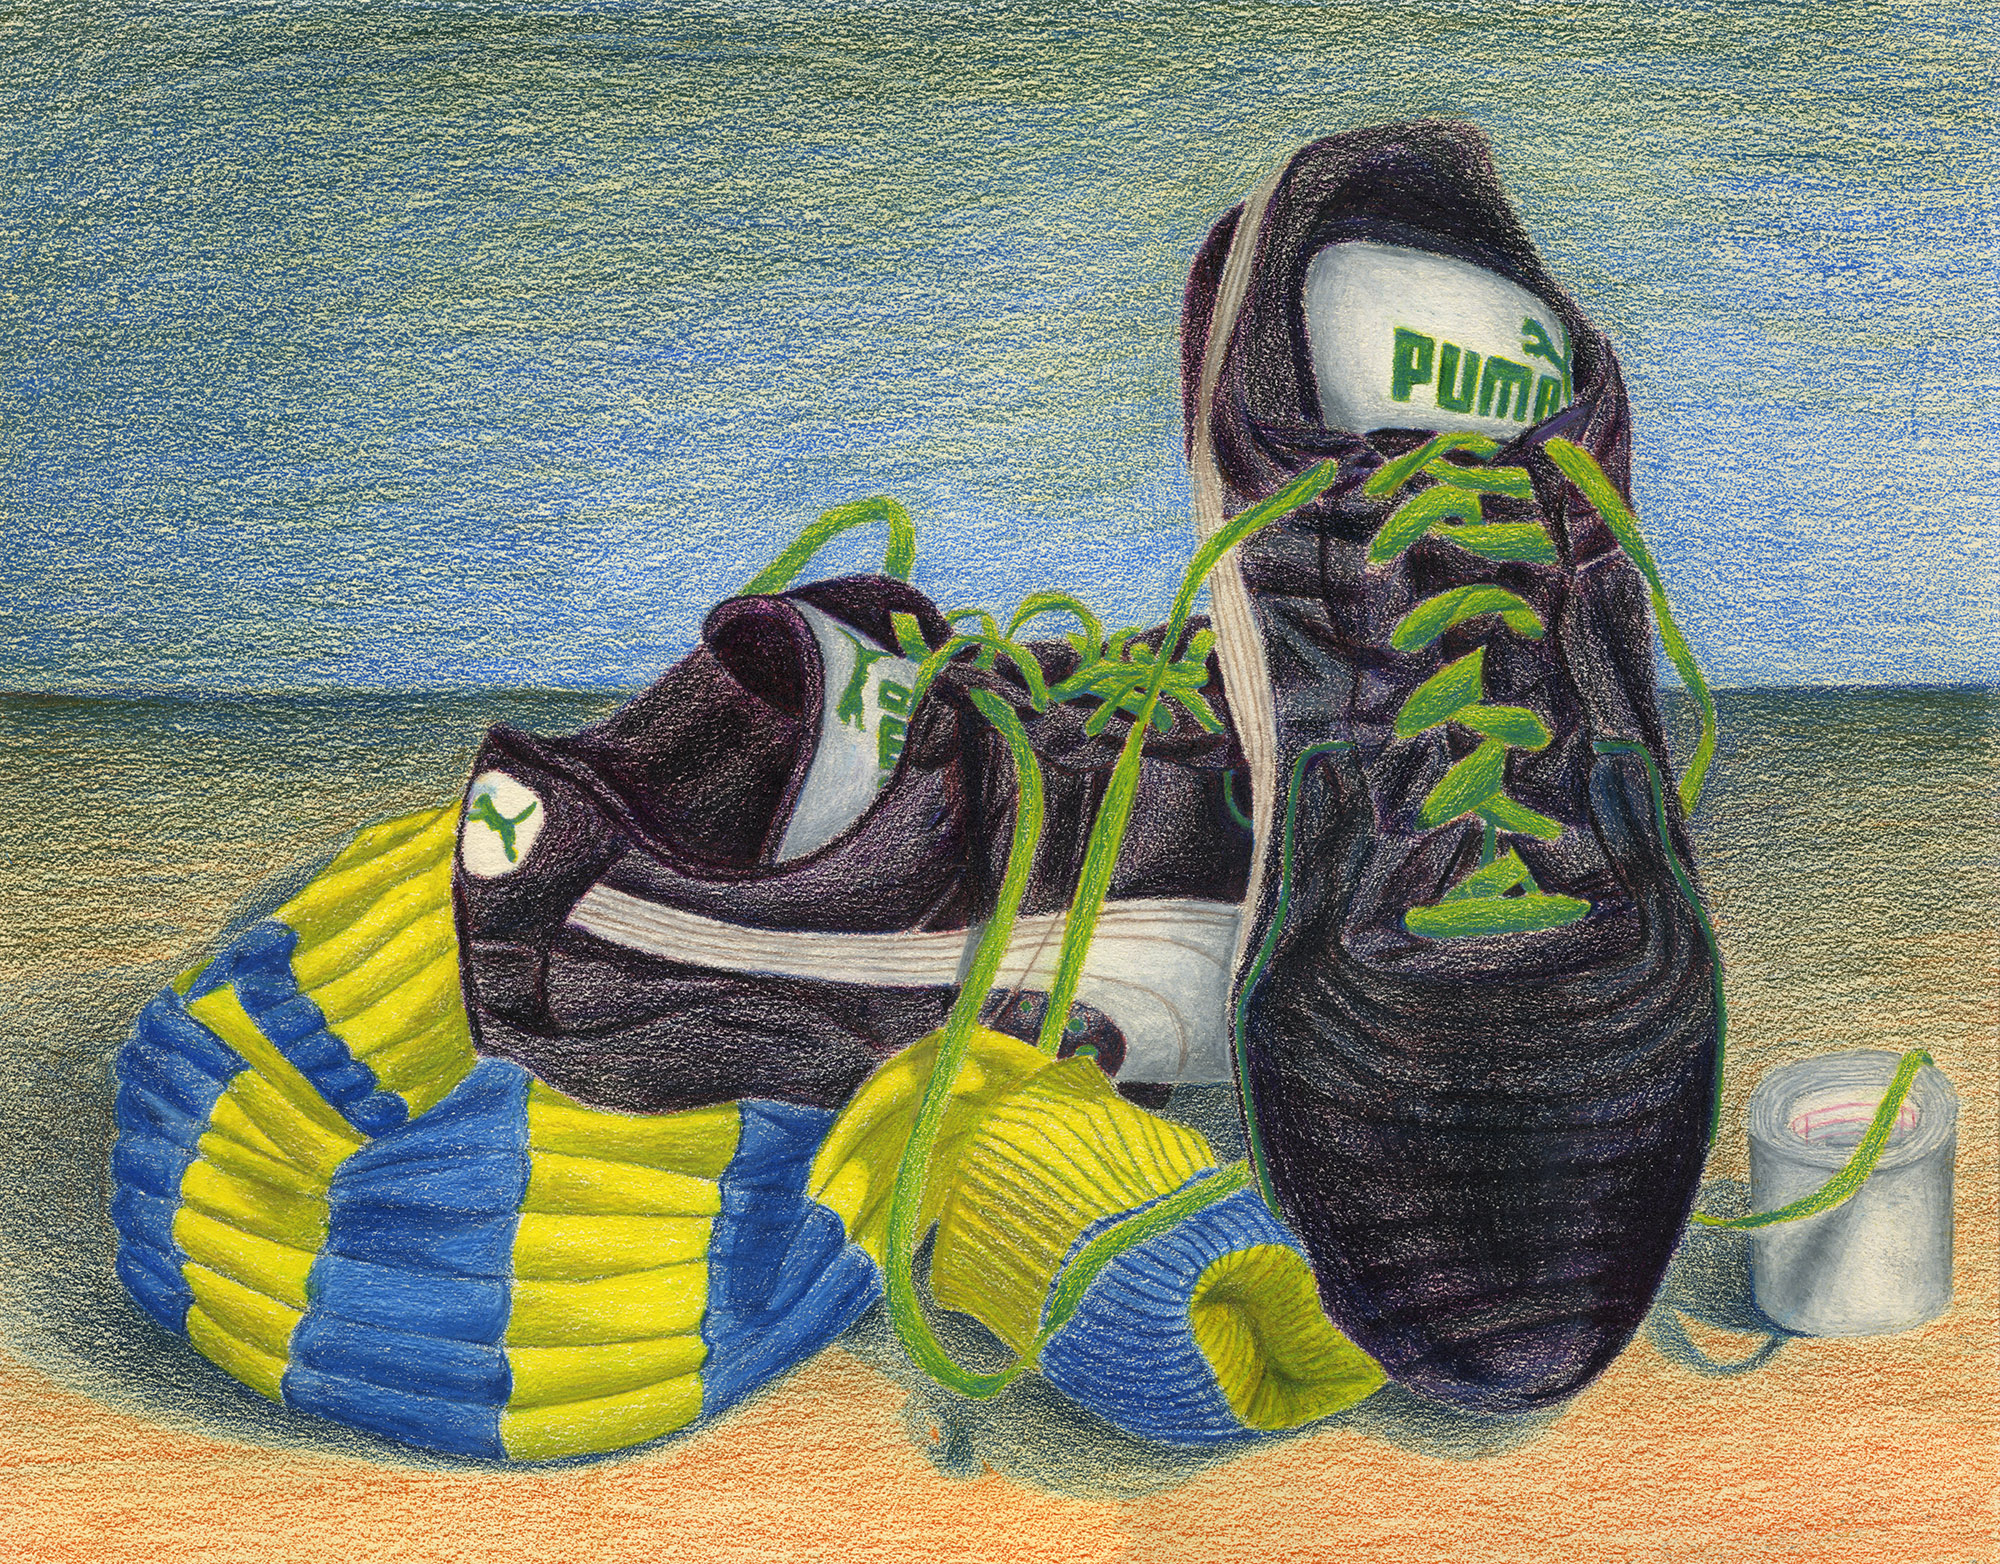 1988_09_or_1989_02_SOCCER_CLEATS_10x13_sm2k